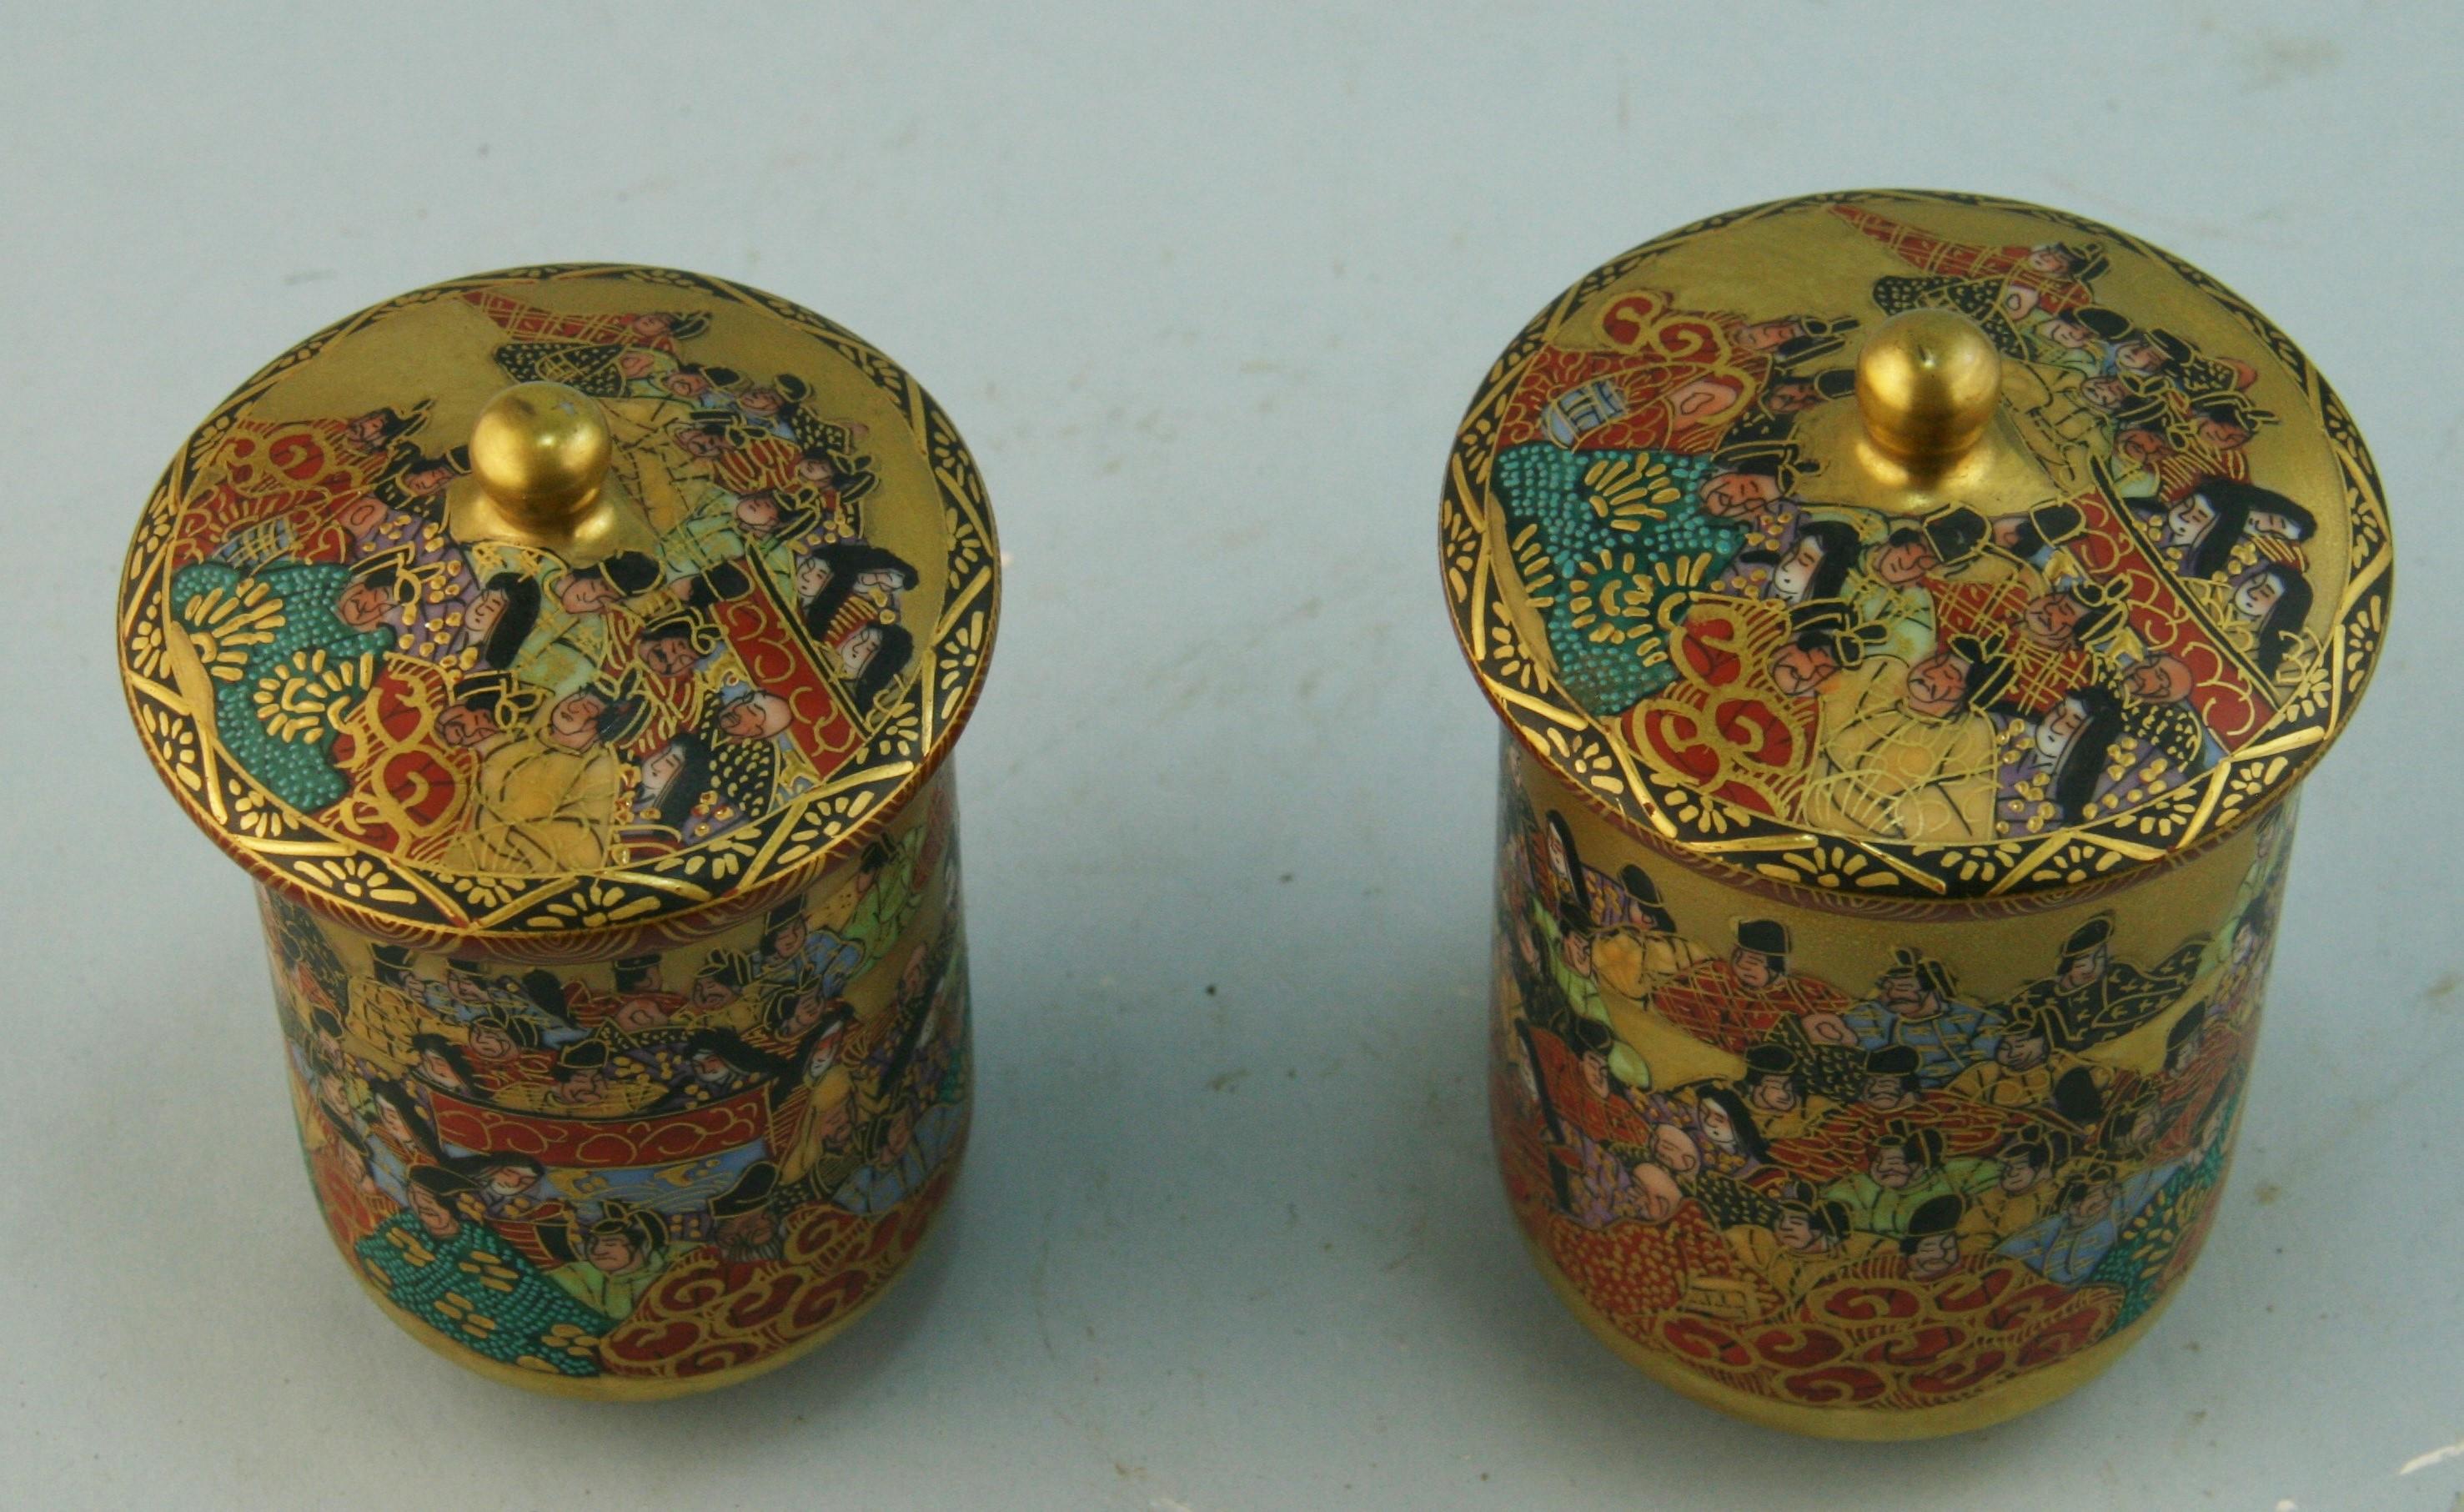 Pair Japanese Satsuma hand decorated lidded cups
Measures: 3.25